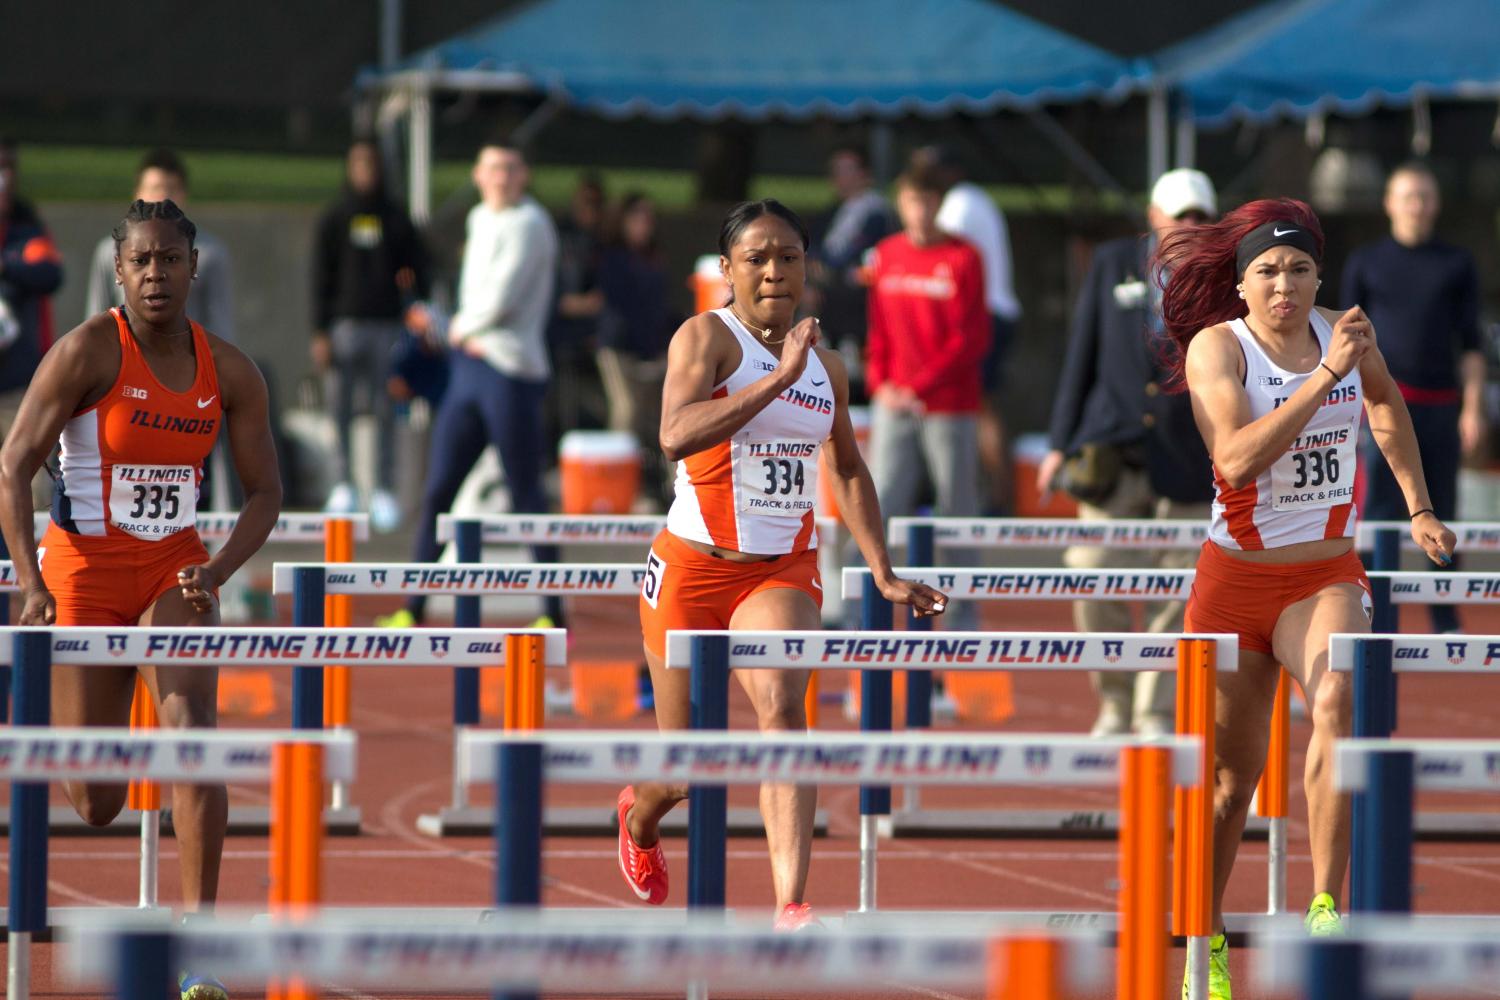 Kortni Smyers-Jones (left), Pedrya Seymour (middle), and Jayla Stewart (right) race down the track in the 100 meter hurdles at the Illinois Twilight at the Illinois Track Field on April 22. Illinois will compete in the NCAA championships this weekend. 